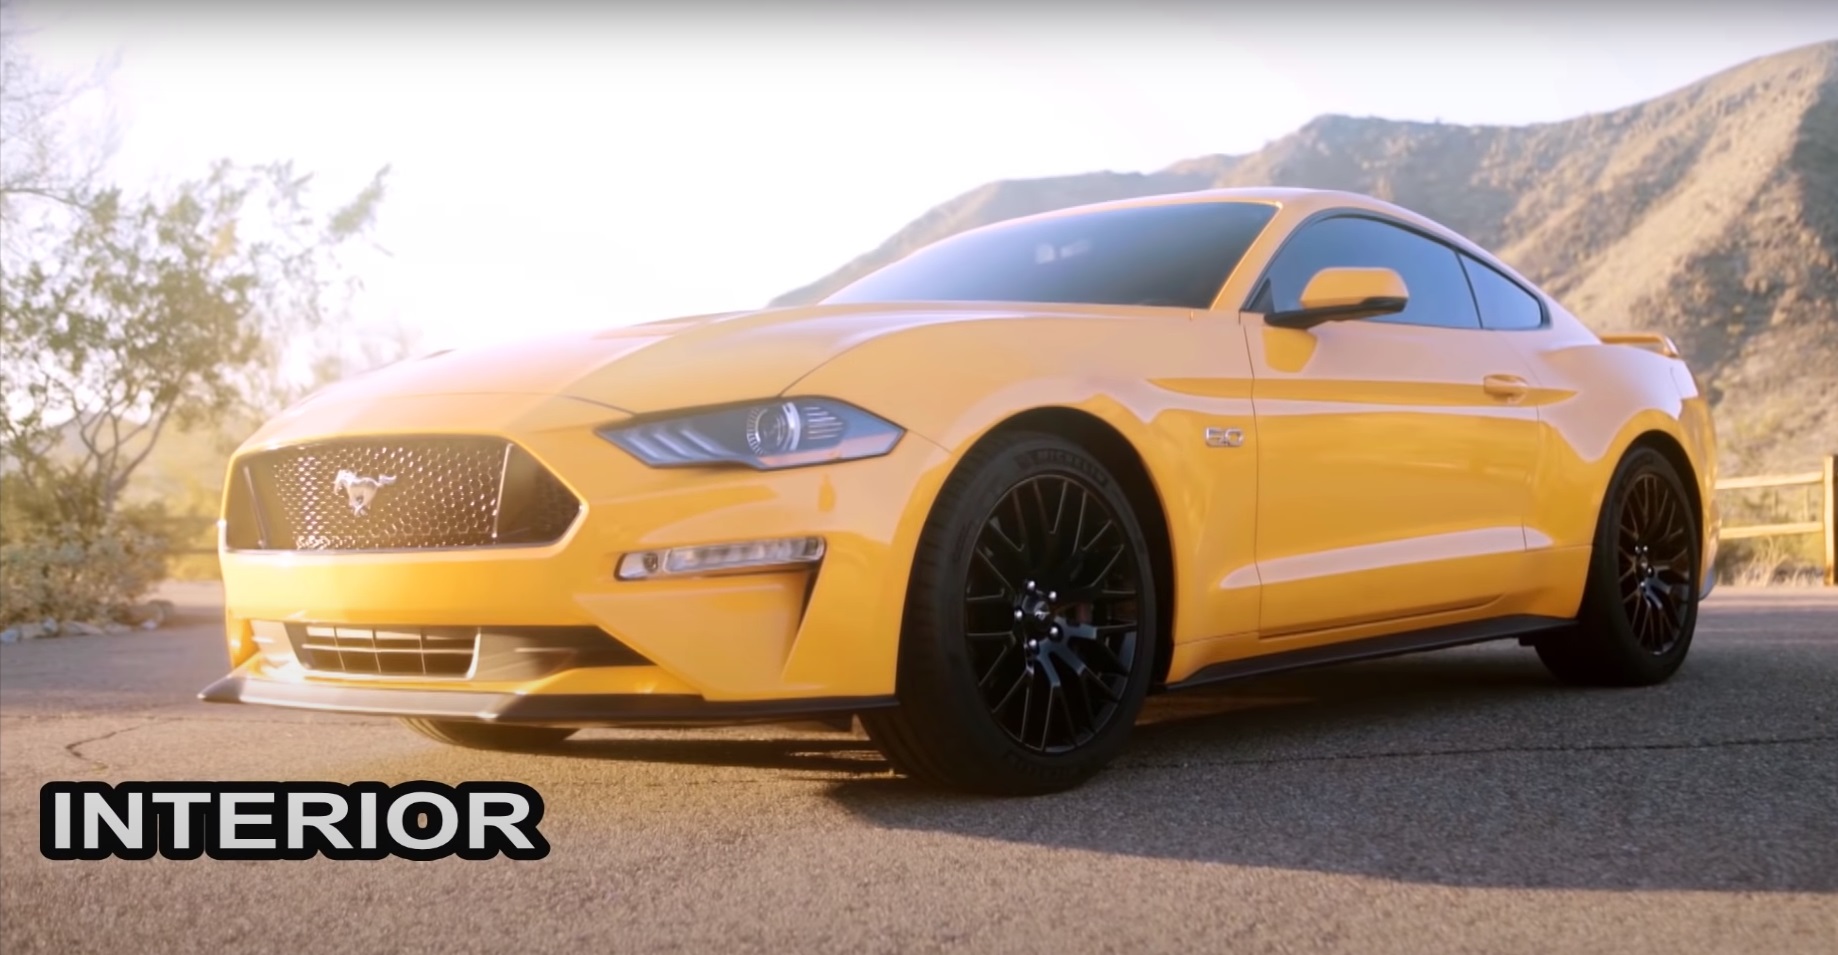 Video: 2018 Ford Mustang - Interior